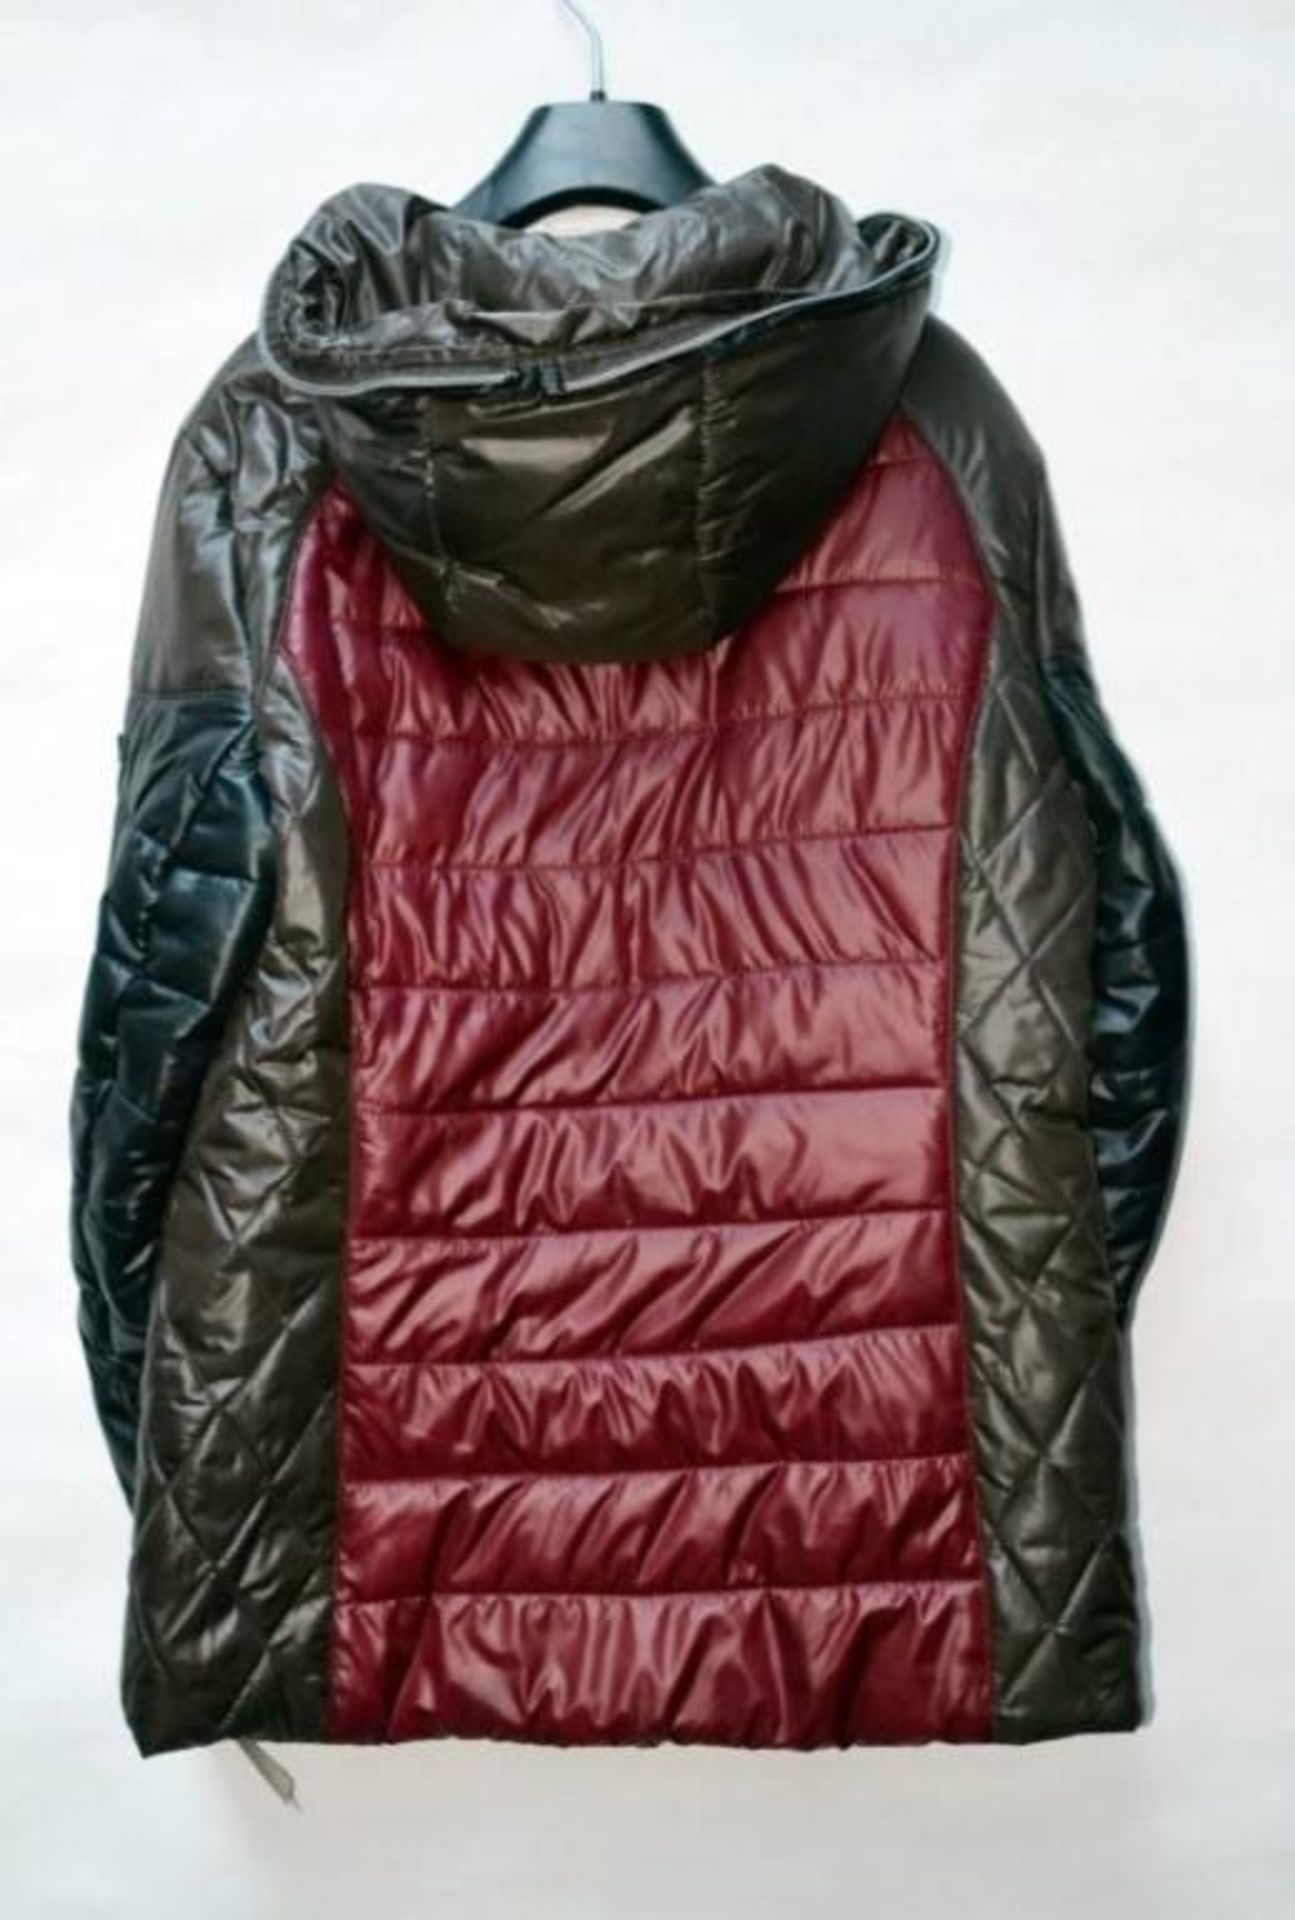 1 x Steilmann KSTN By Kirsten Womens Padded Winter Coat - Features Removable Zipped Hood - UK Size 1 - Image 6 of 6